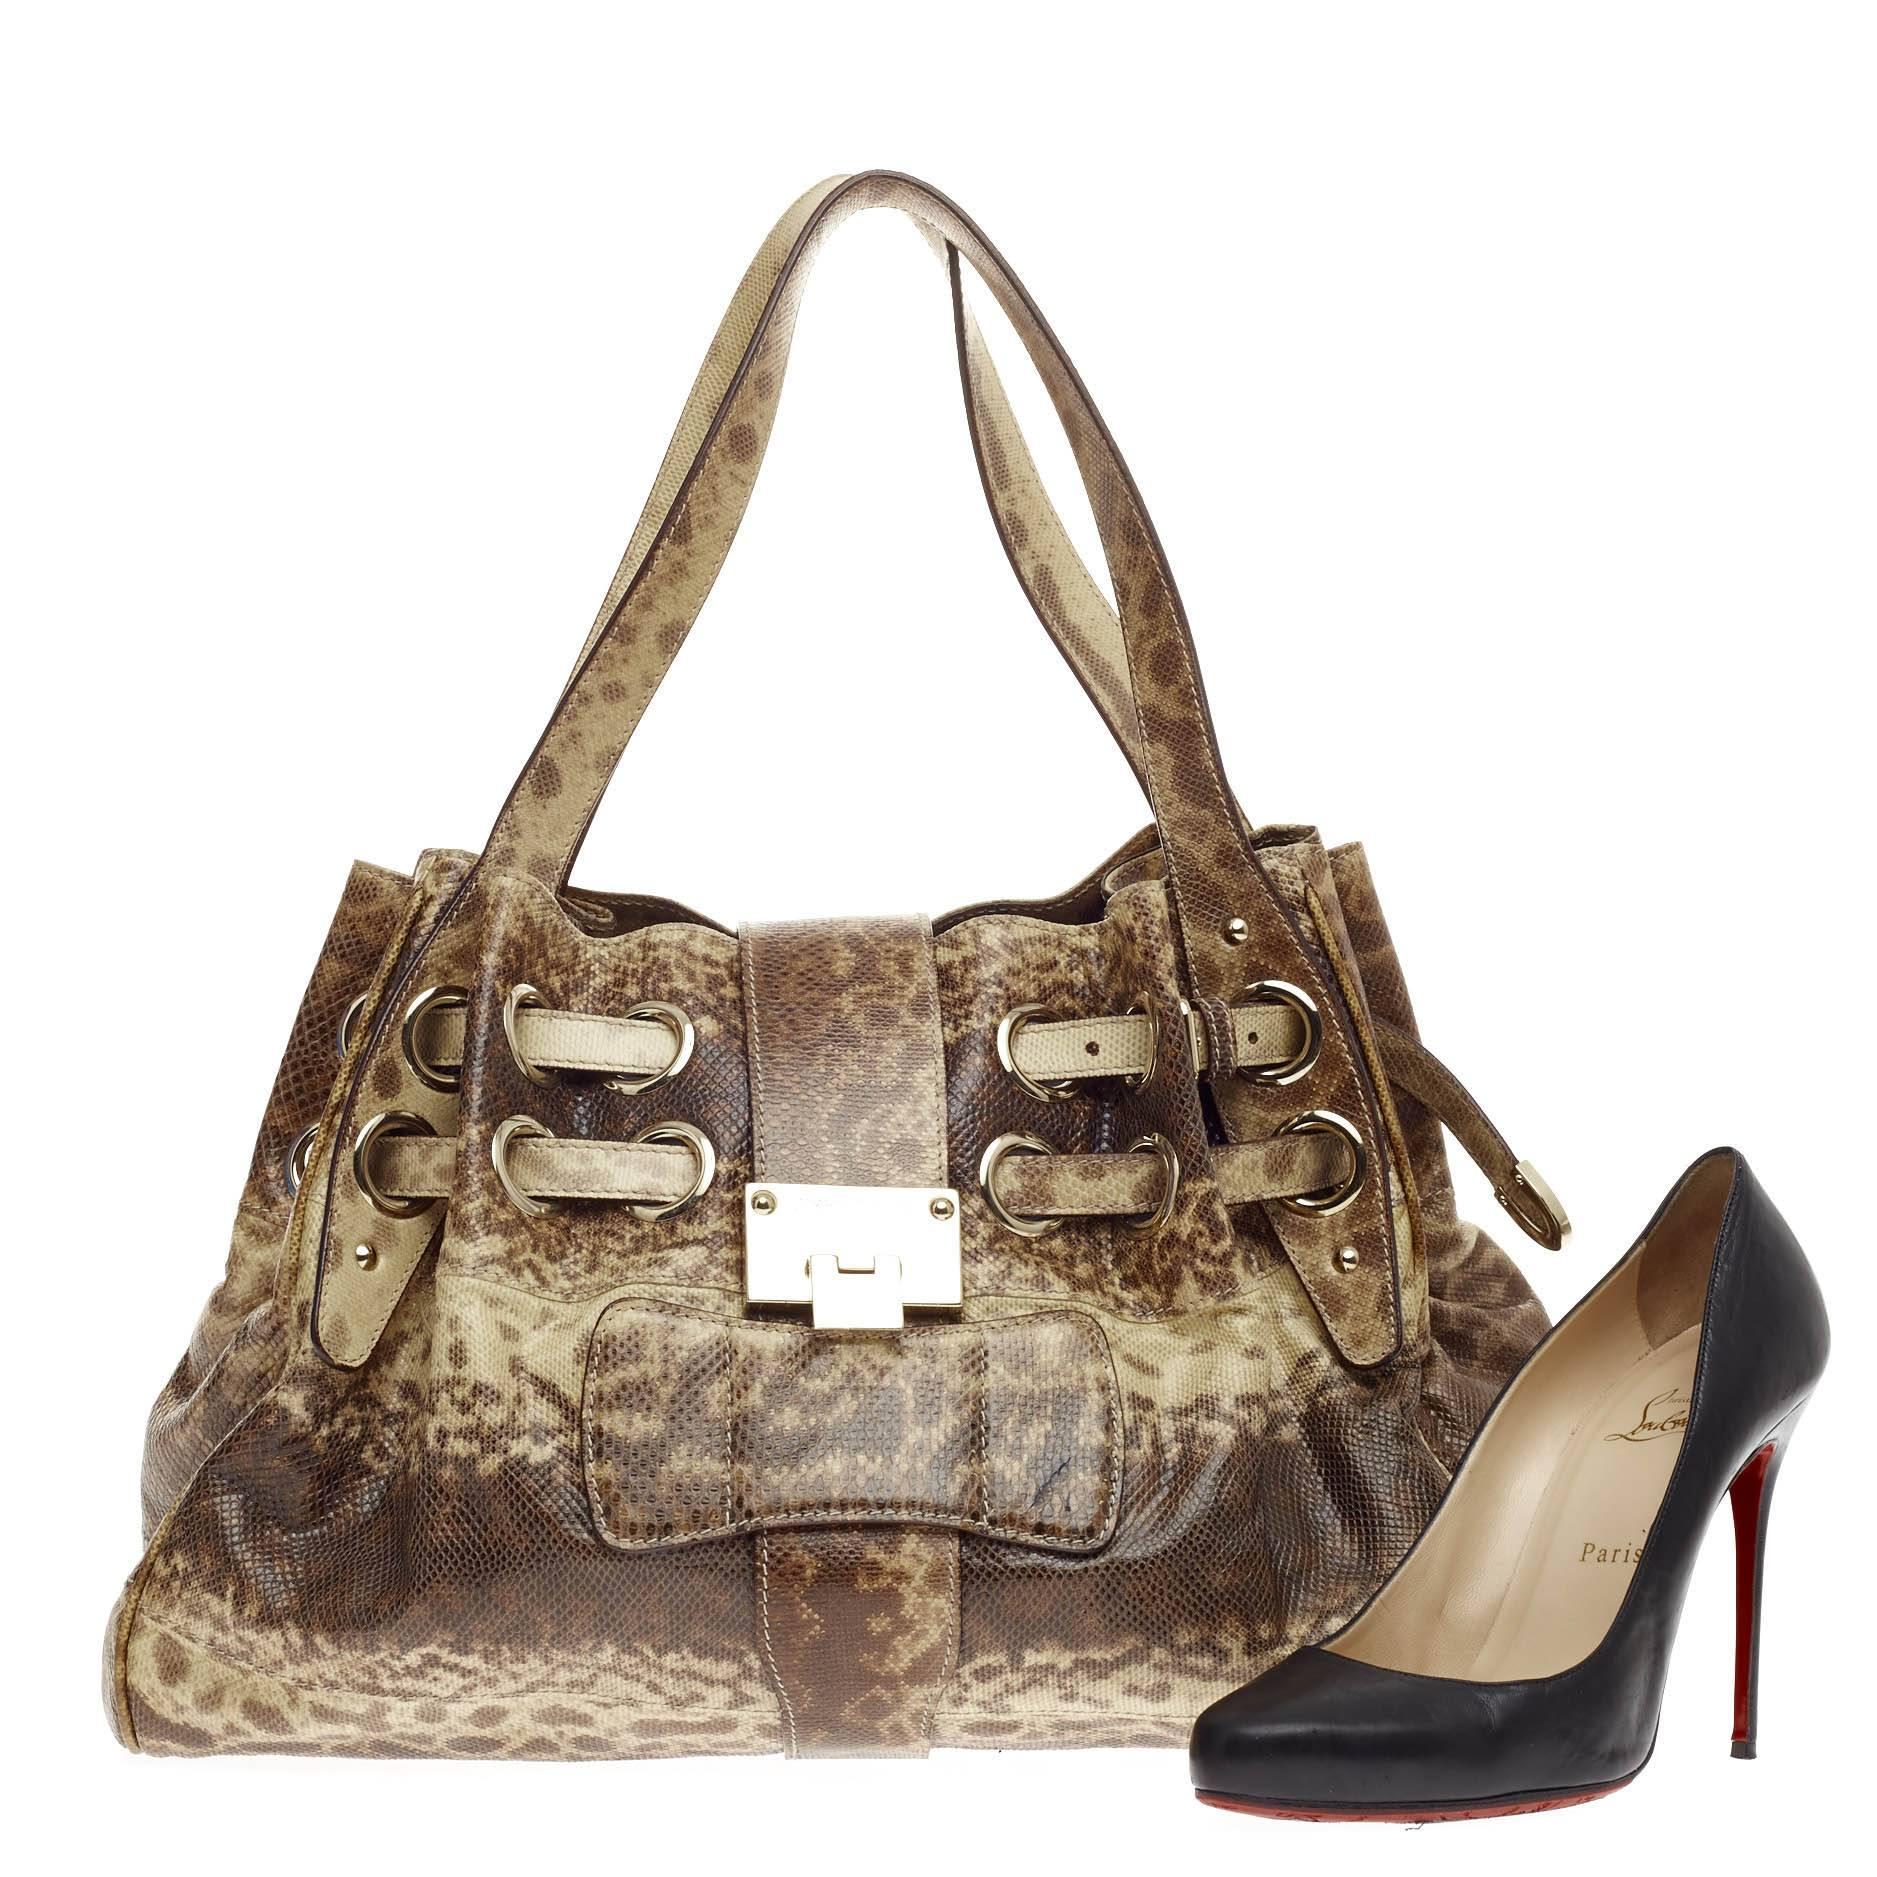 This authentic Jimmy Choo Ramona Hobo Snakeskin is sophisticated and easy-to-carry made for everyday excursions. Constructed from natural brown and yellow genuine snakeskin, this hobo features multiple wrapped slim leather straps laced through metal